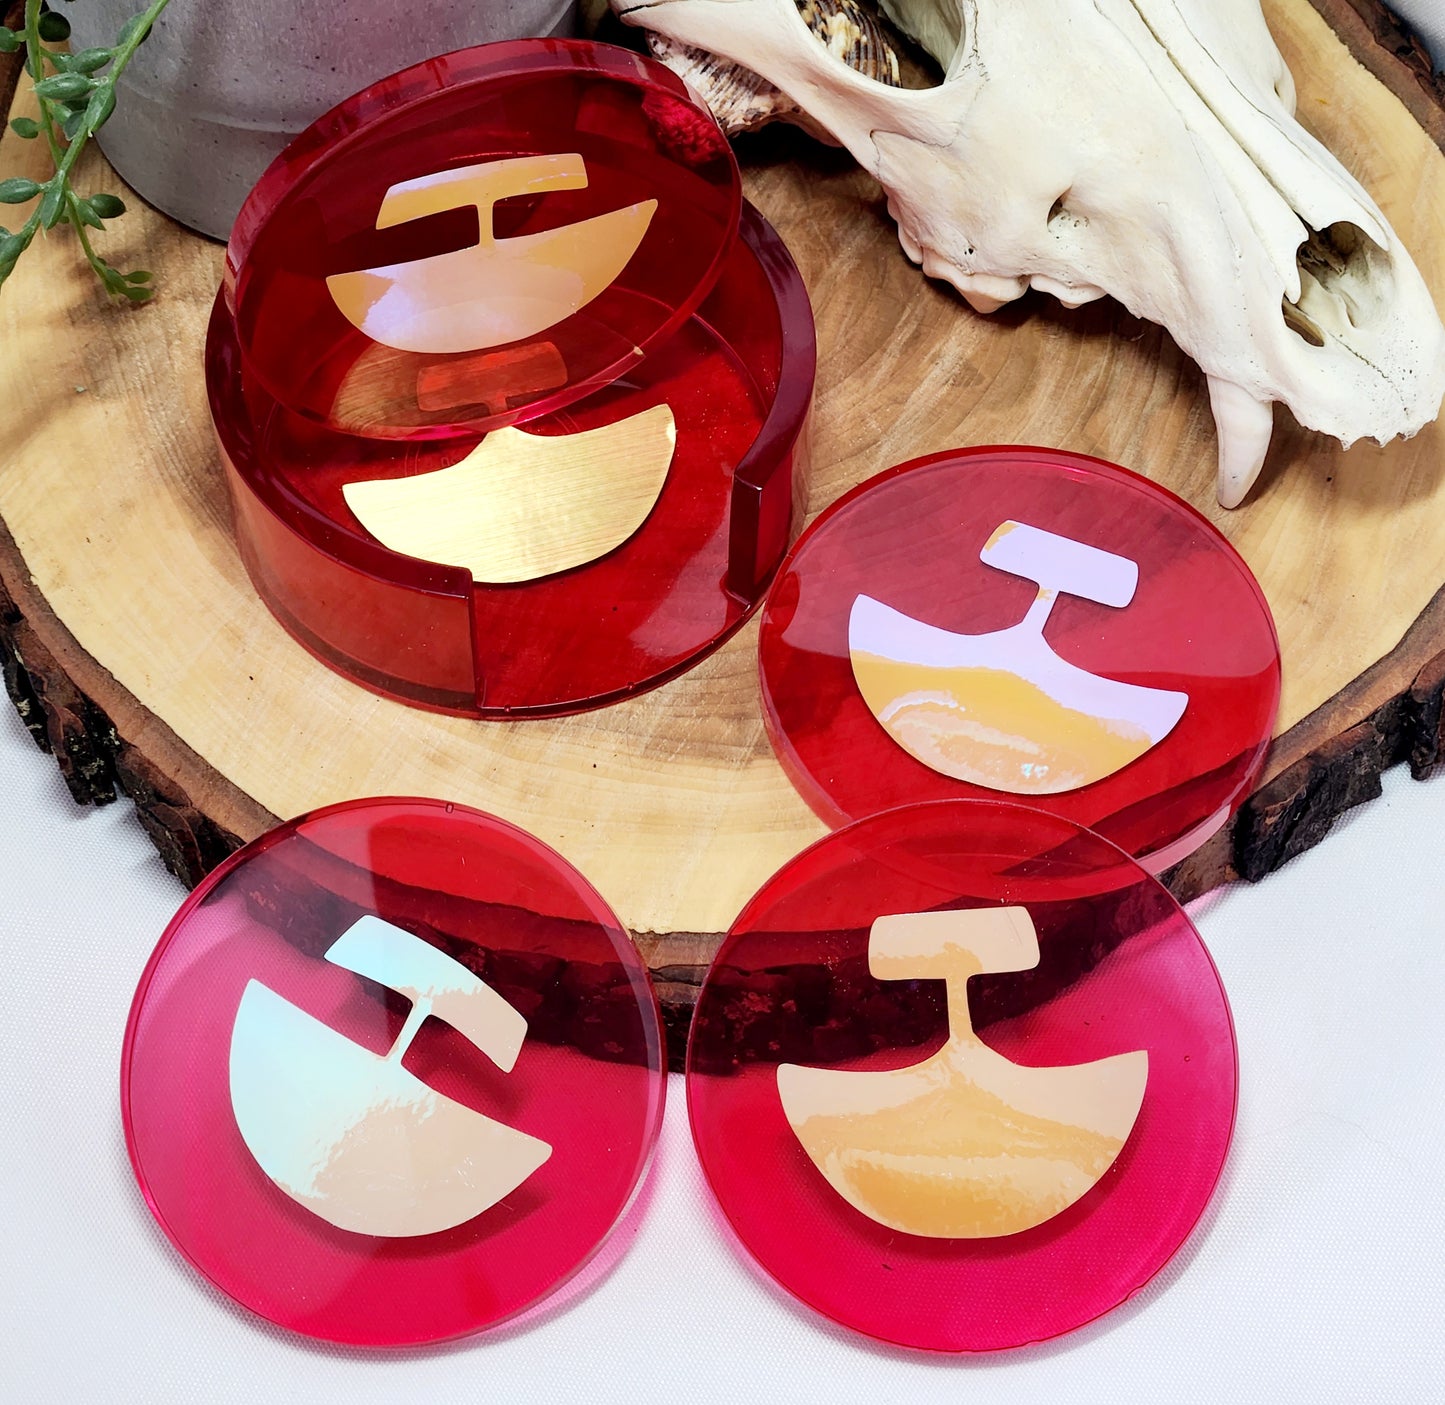 Coaster sets and matching holder